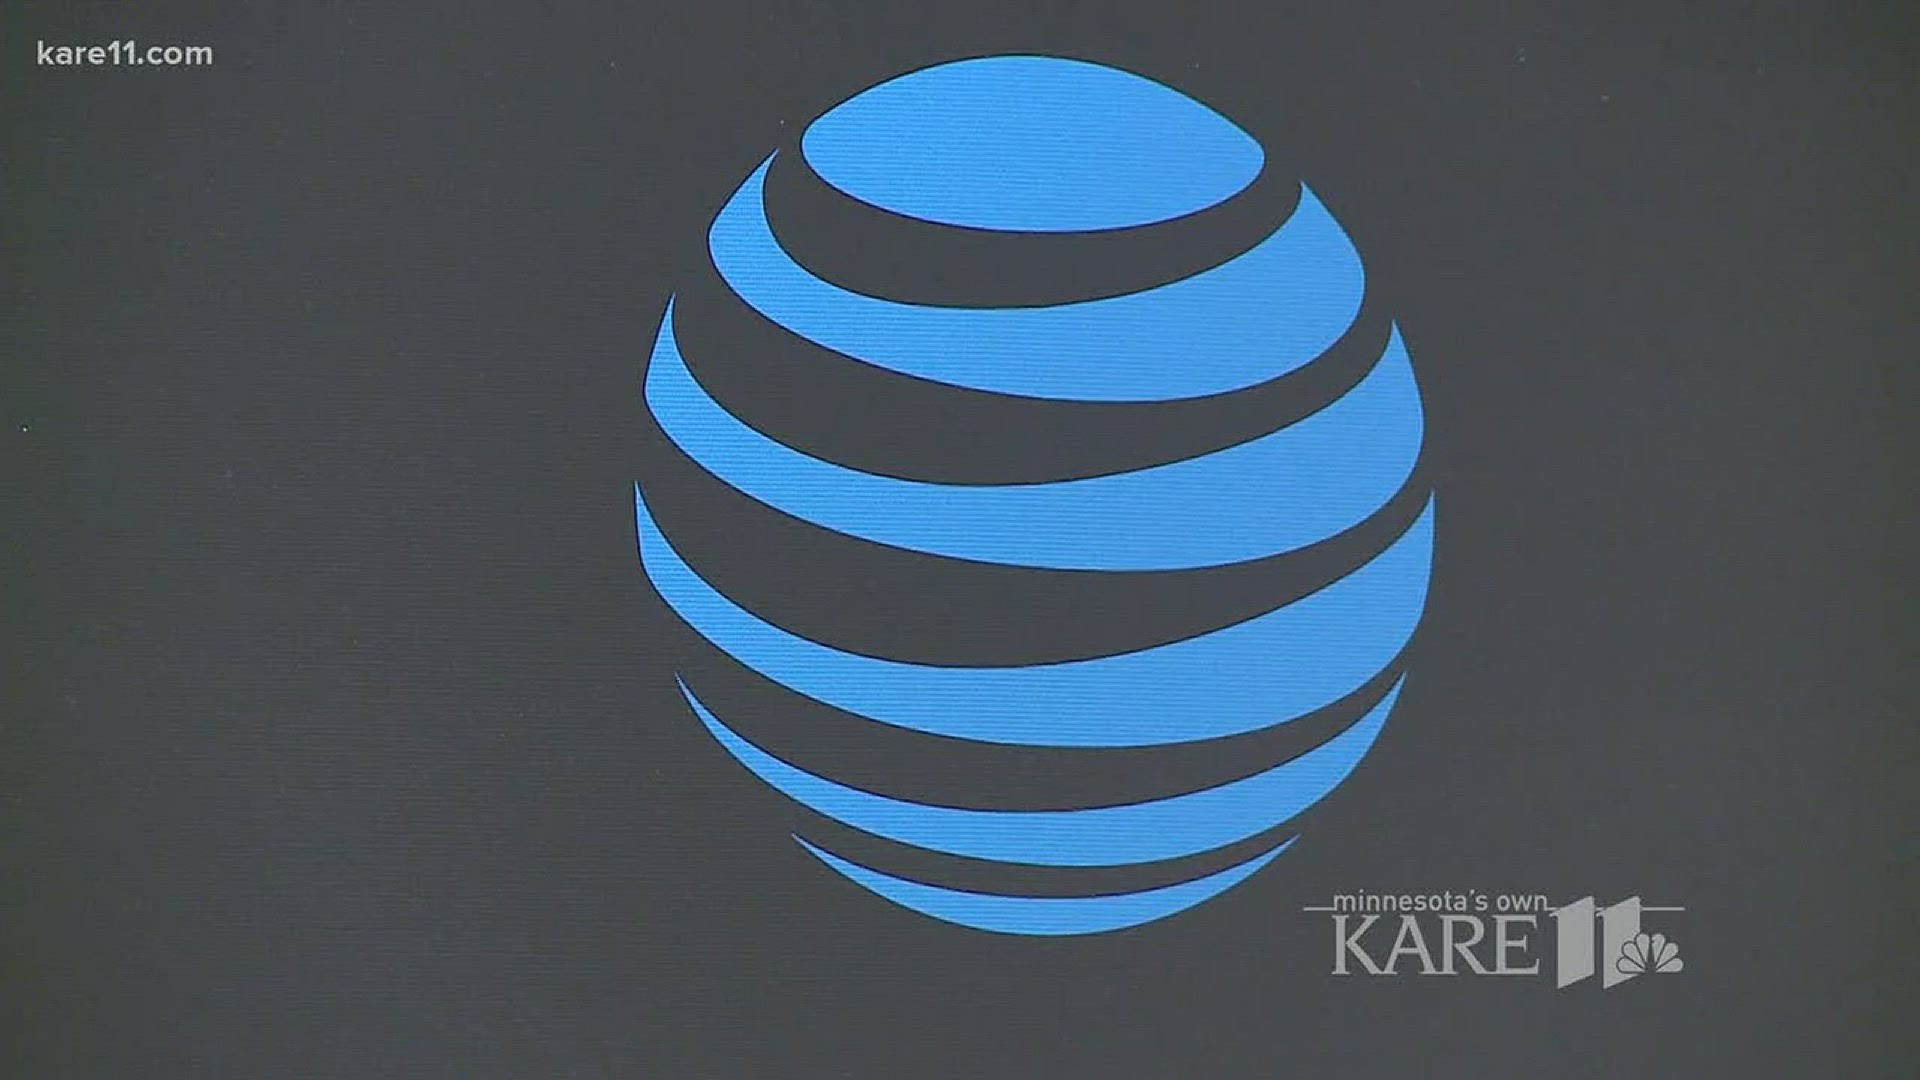 AT&T users are about to get a big speed boost for the Super Bowl and beyond.